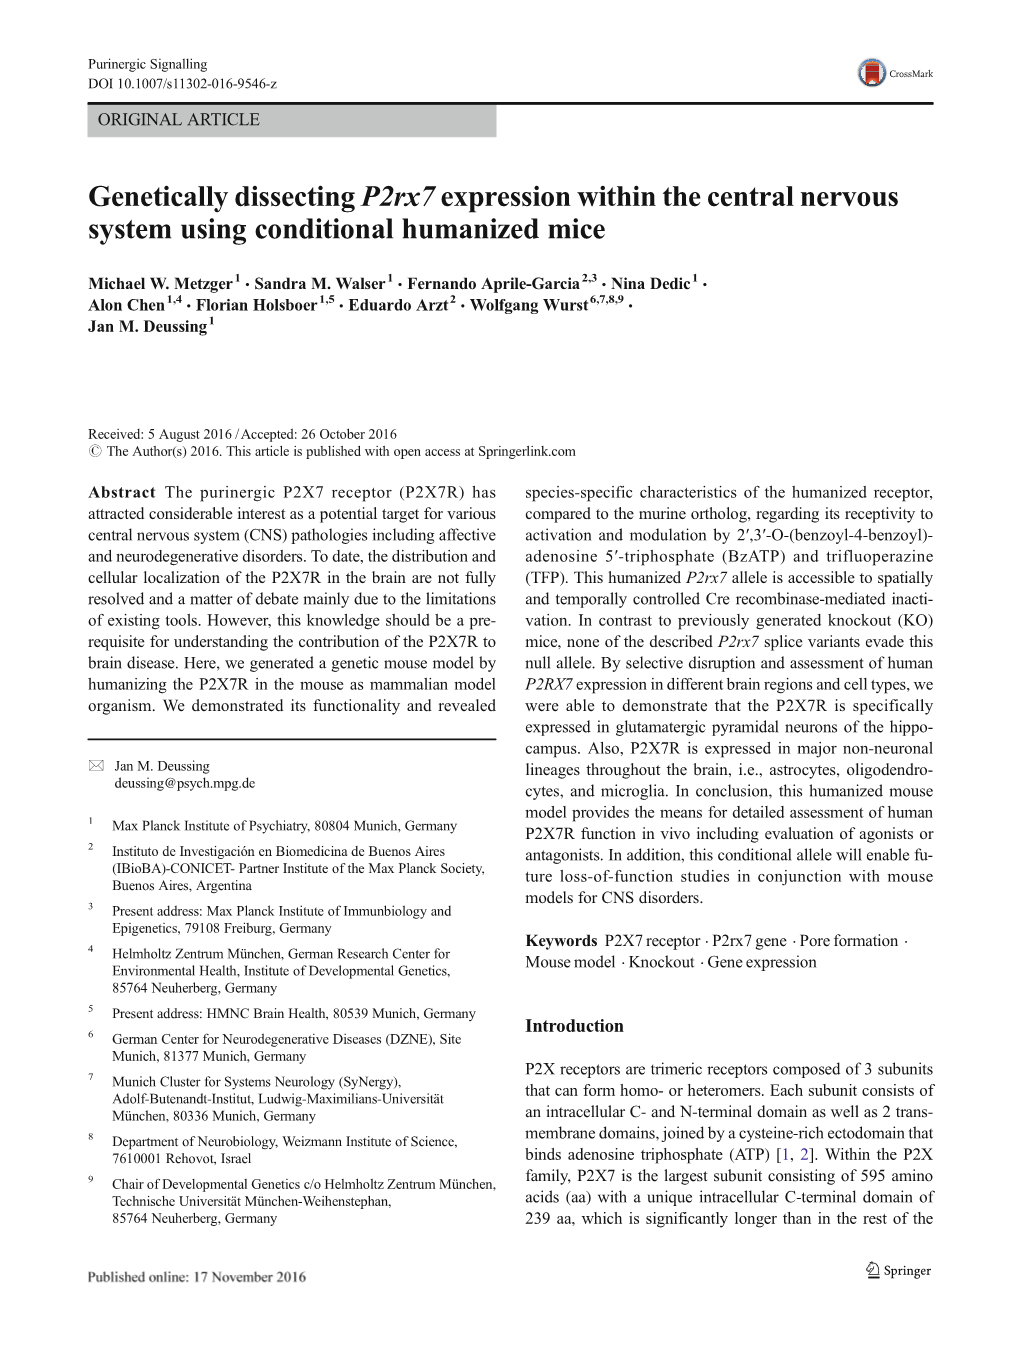 Genetically Dissecting P2rx7 Expression Within the Central Nervous System Using Conditional Humanized Mice